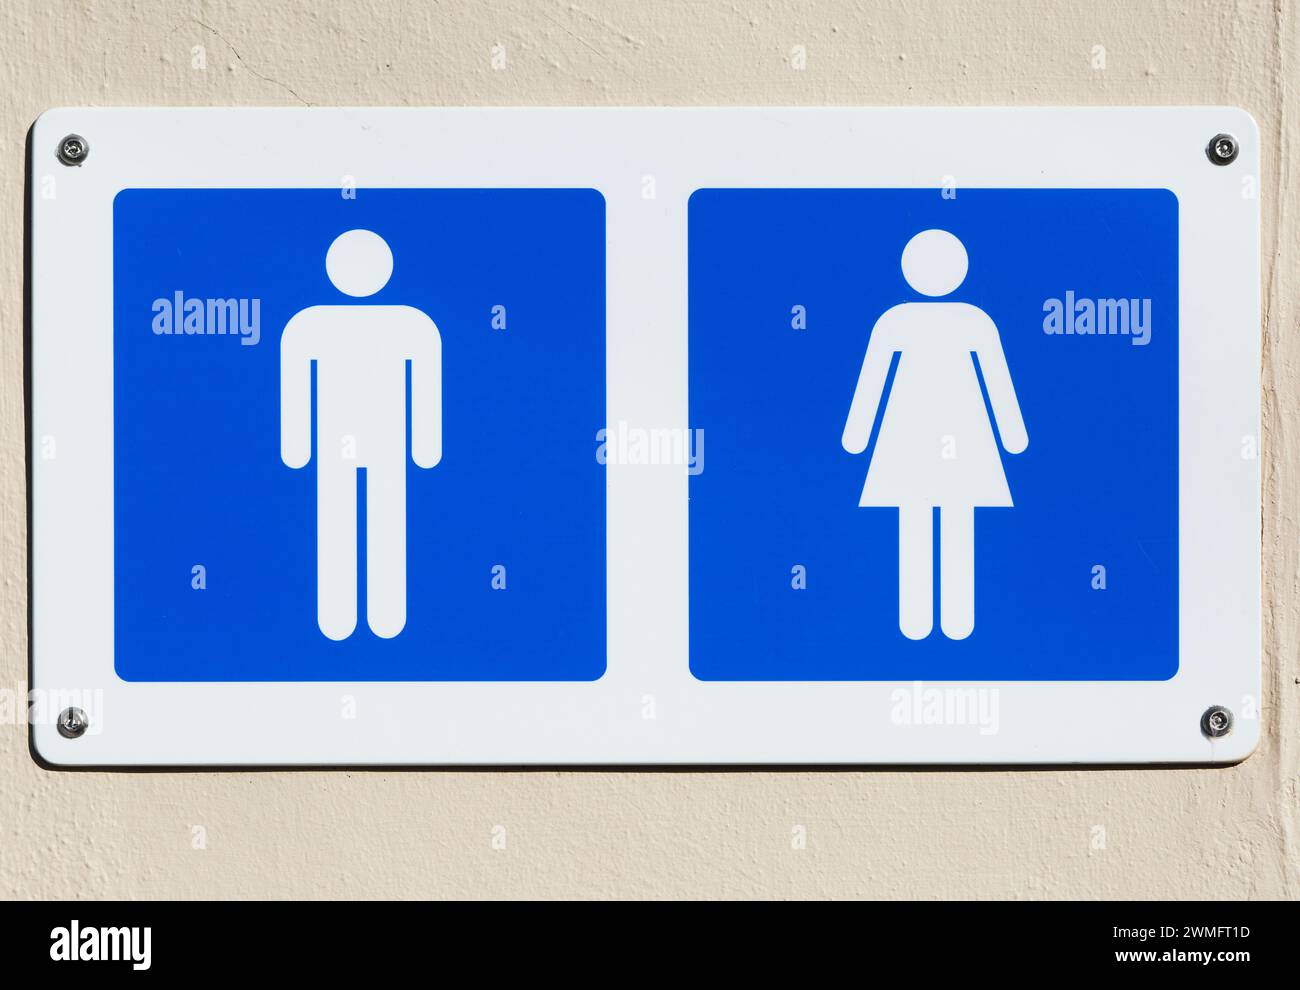 Cut out white male and female figures on blue background, public toilets sign UK Stock Photo